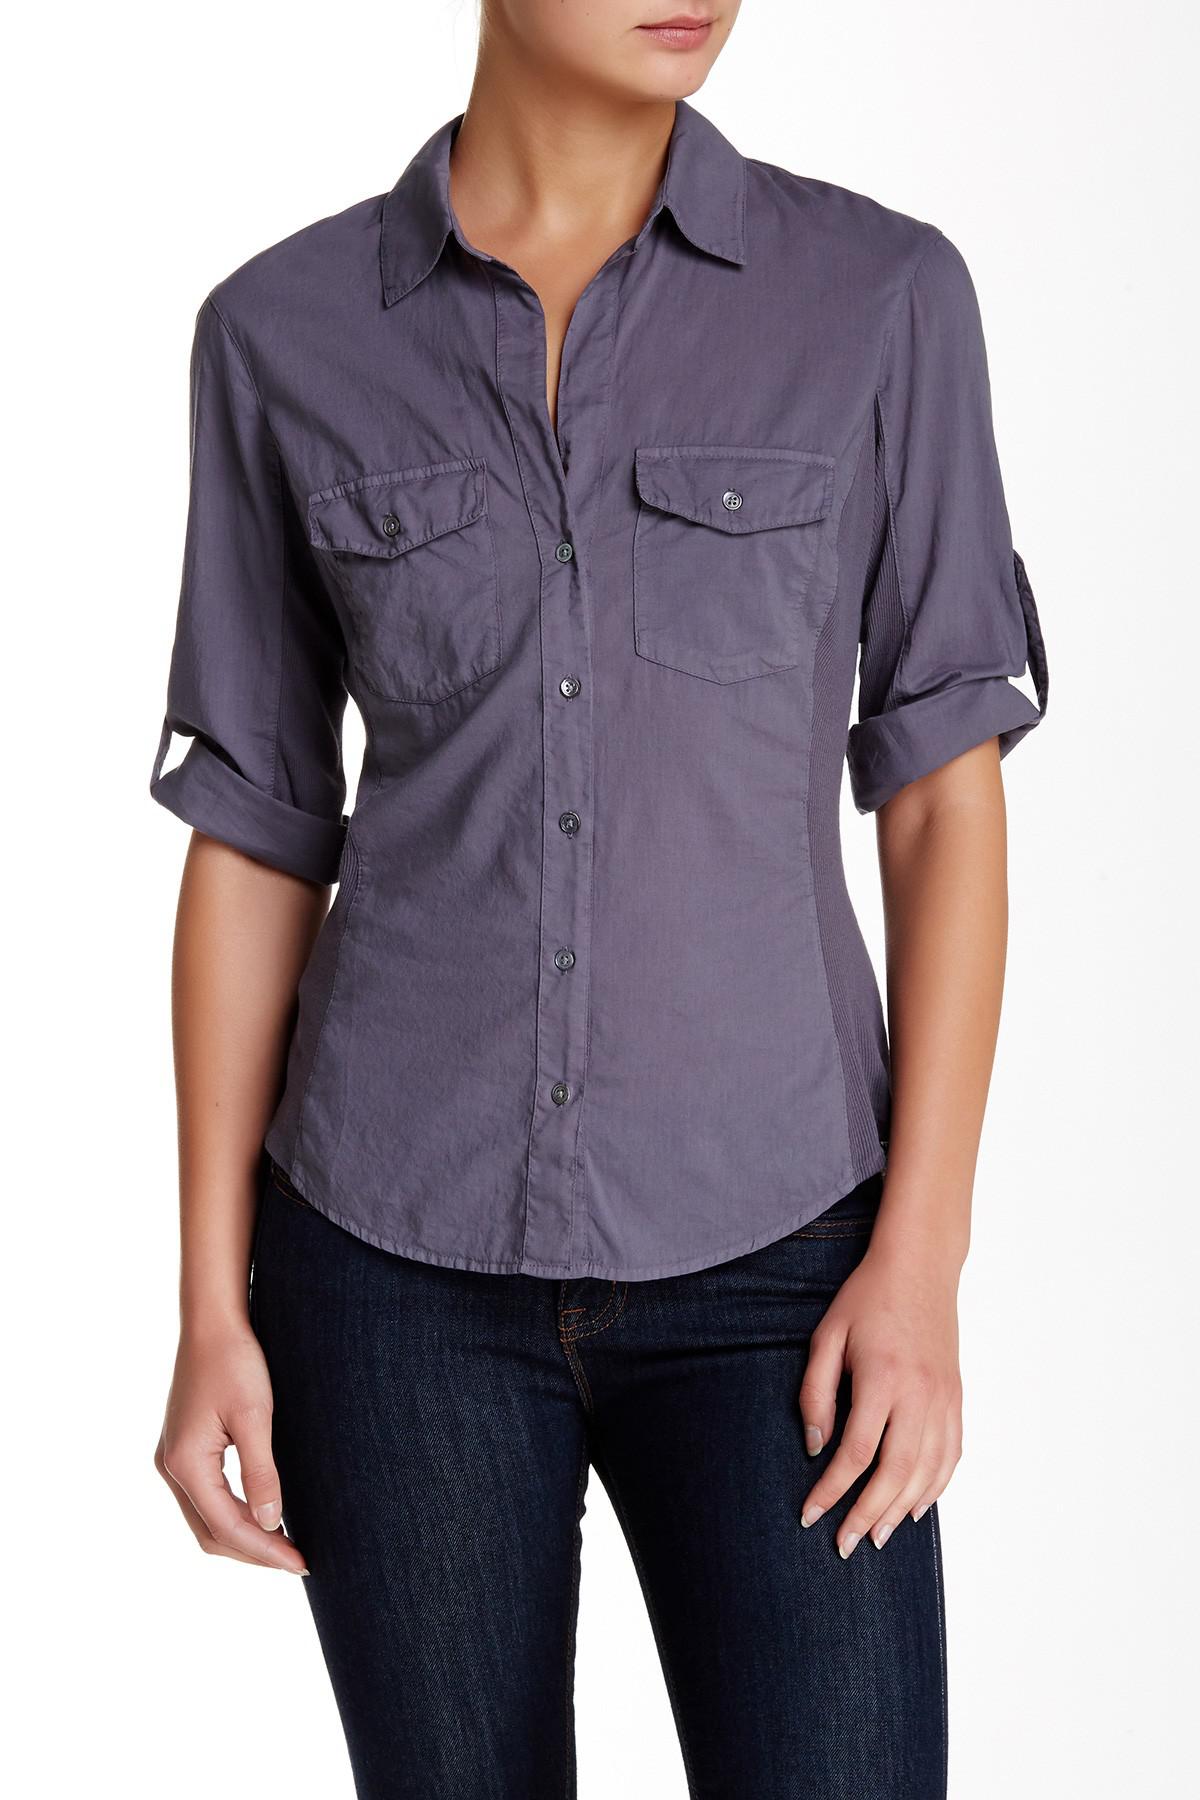 James Perse Contrast Ribbed Surplus Shirt in Purple | Lyst